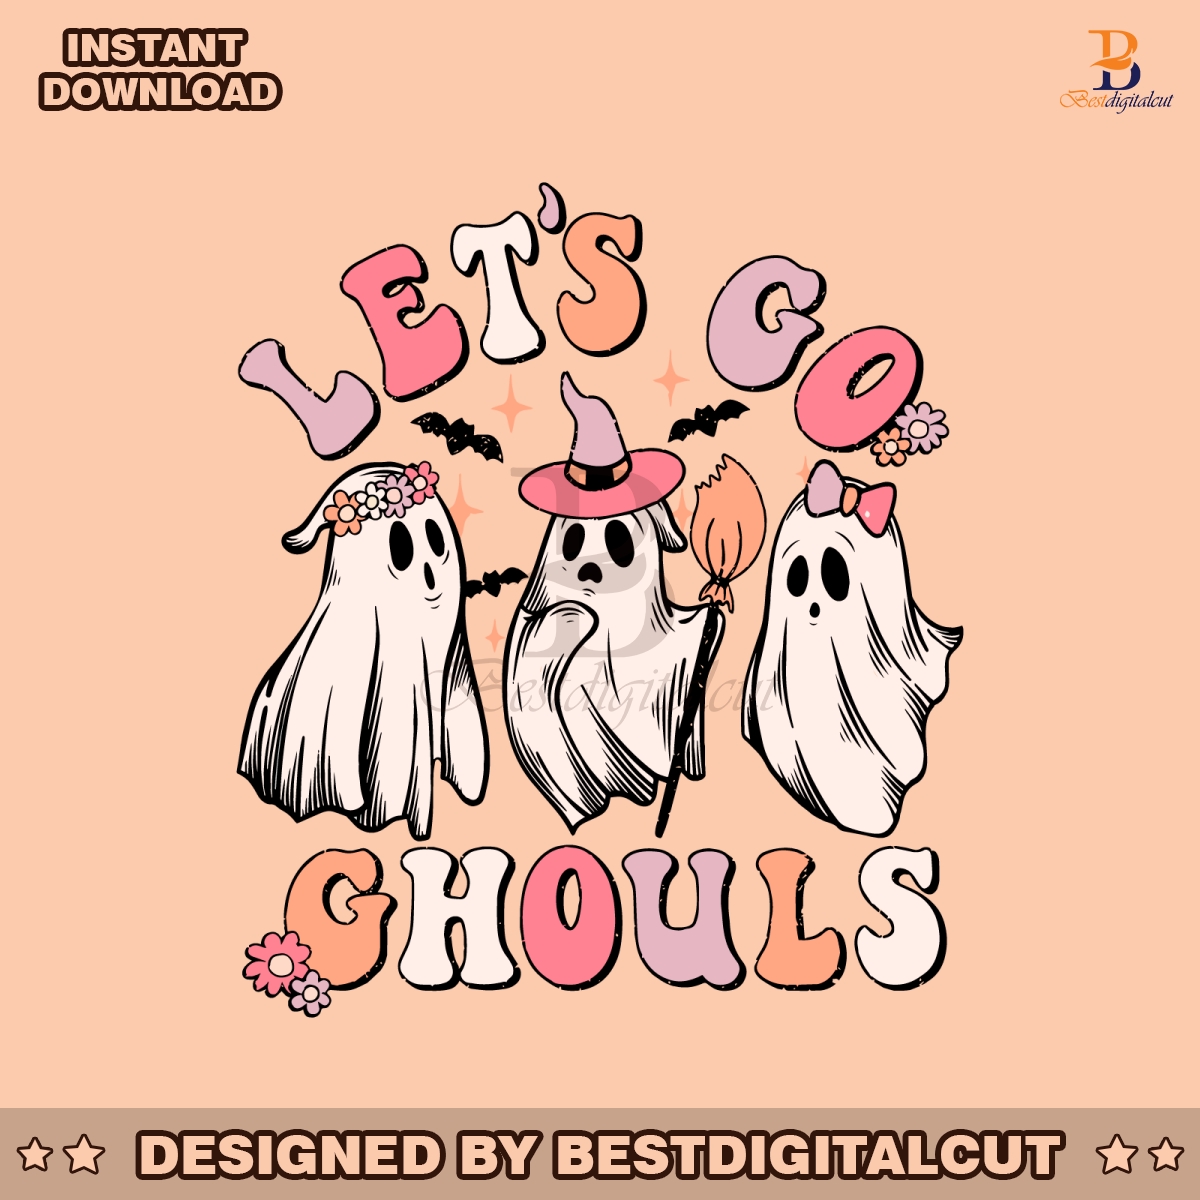 witchy-ghost-lets-go-ghouls-halloween-svg-file-for-cricut